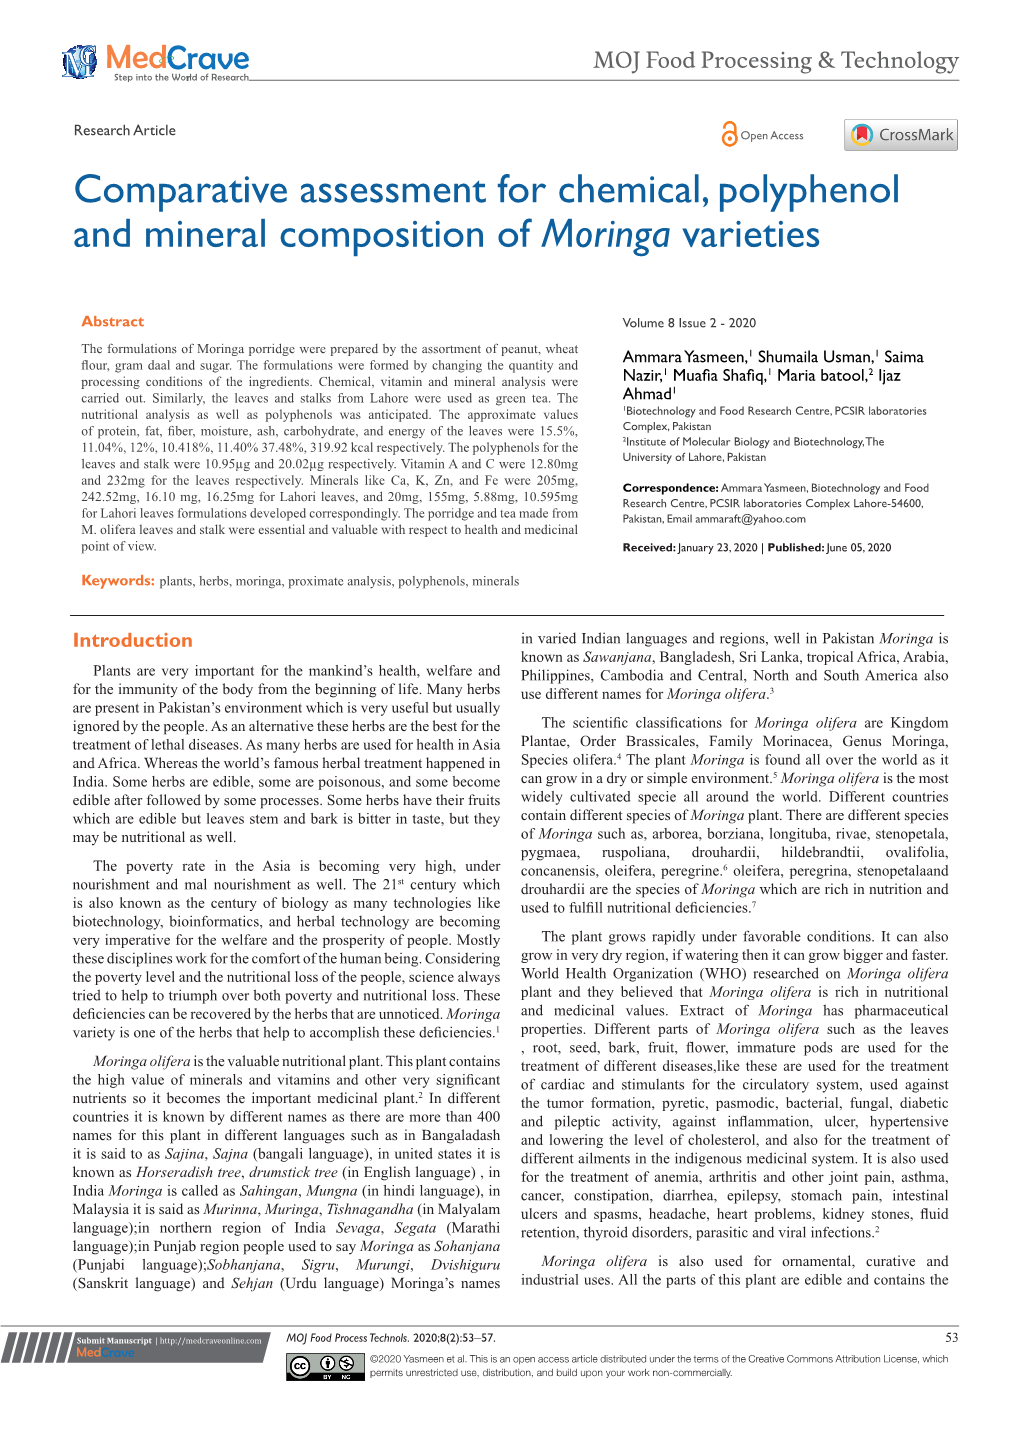 Comparative Assessment for Chemical, Polyphenol and Mineral Composition of Moringa Varieties